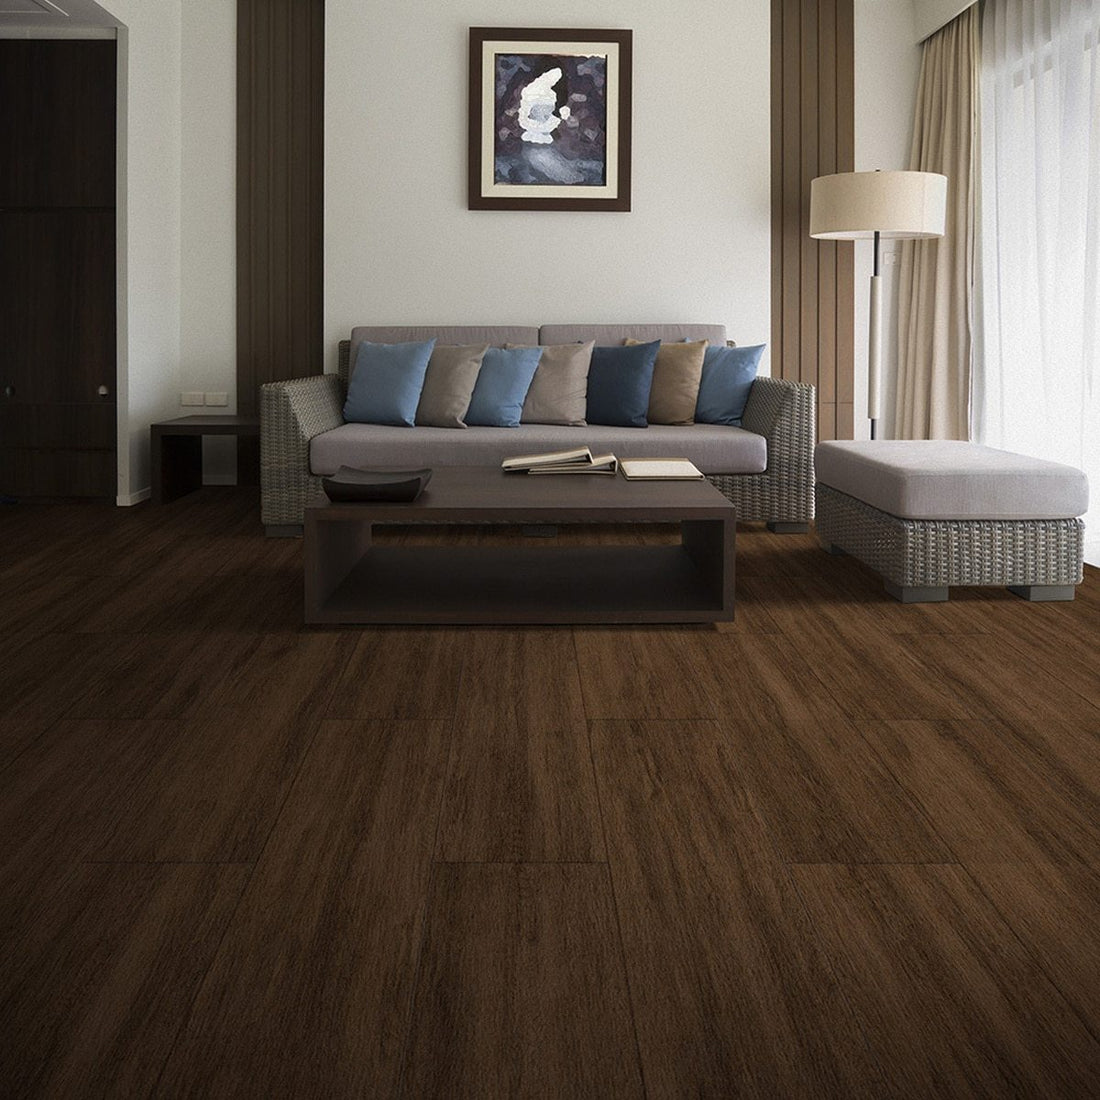 Ravine Lodge Engineered Wood Flooring Tile - Truffle, 3/8&quot; x 9&quot;, 4mm Thickness&quot;